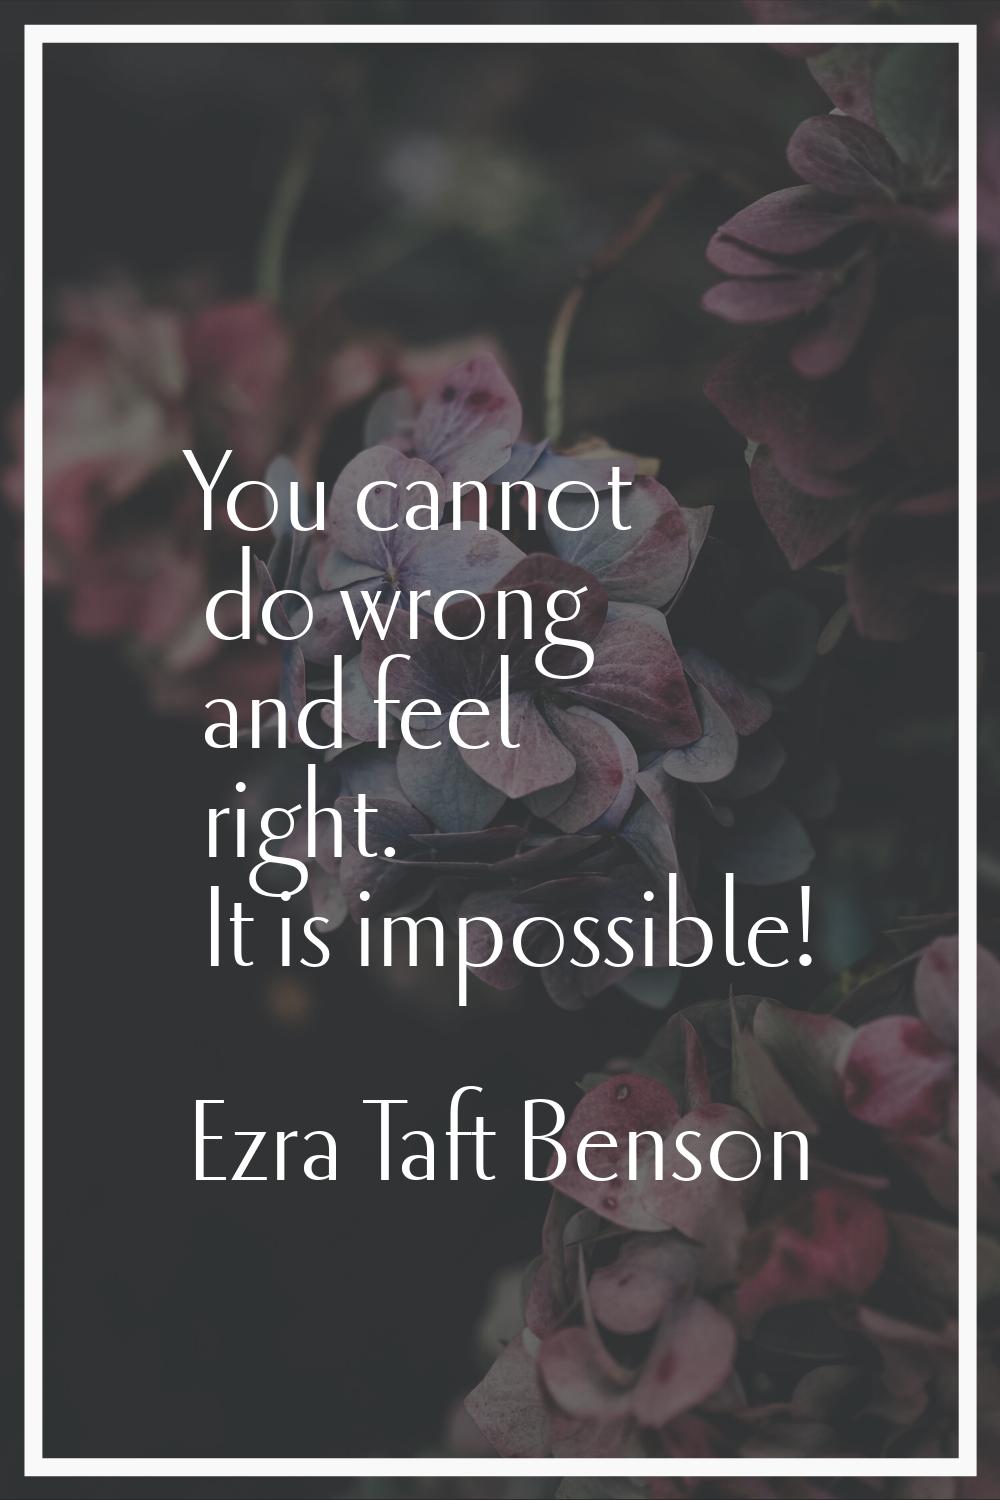 You cannot do wrong and feel right. It is impossible!